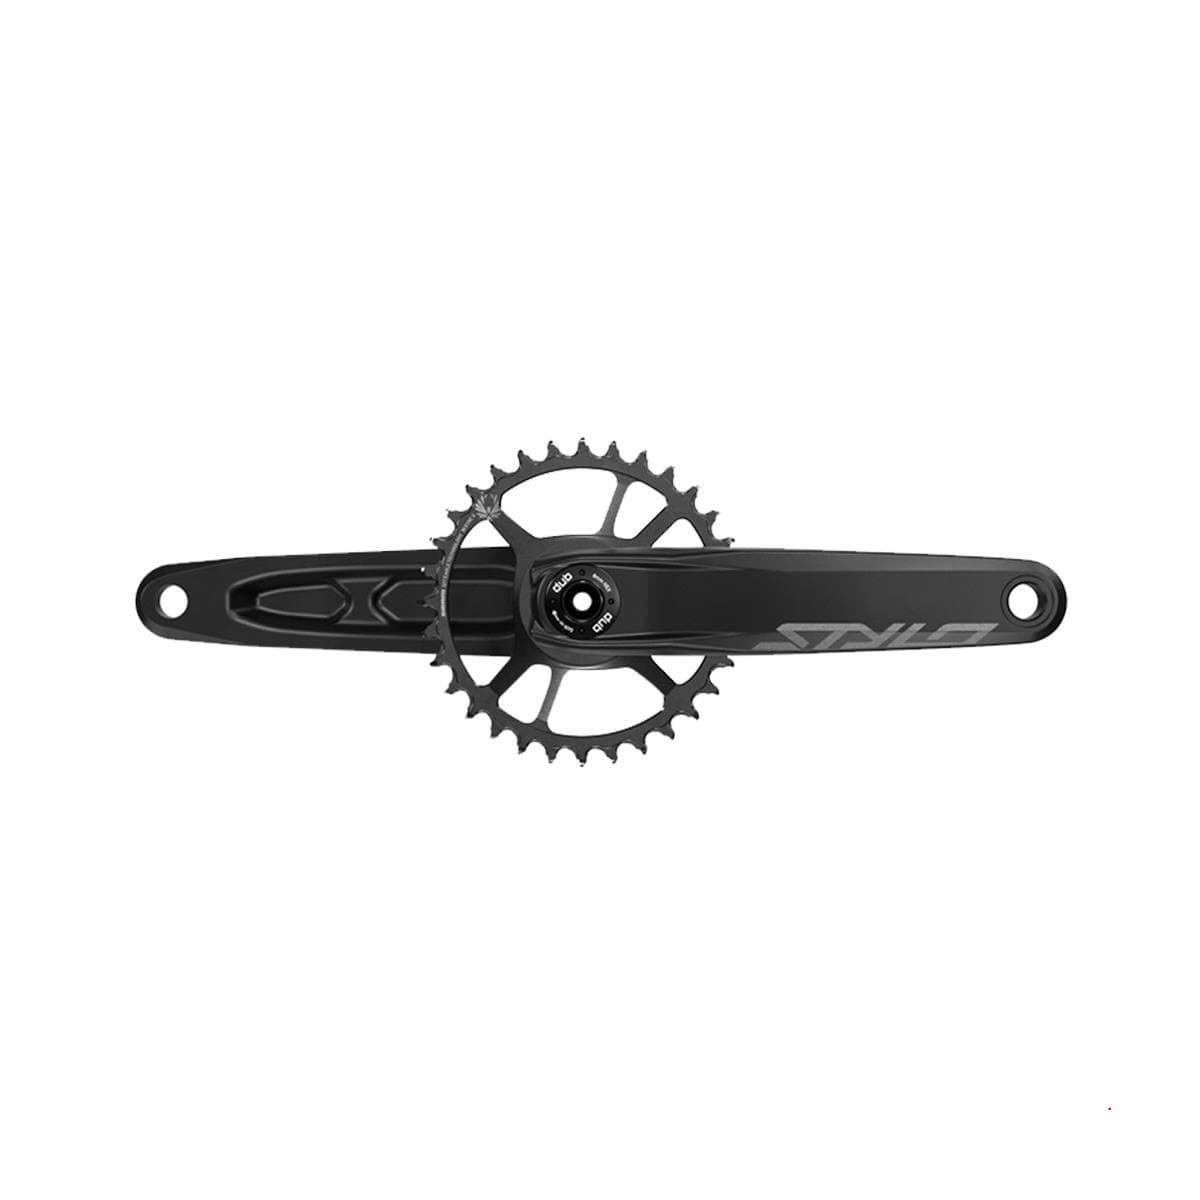 Truvativ Crank Stylo 6K Aluminum Eagle Cannondale-Ai Dub 12S With Direct Mount 32T X-Sync 2 Chainring Black (Dub Cups/Bearings Not Included): Black 175Mm